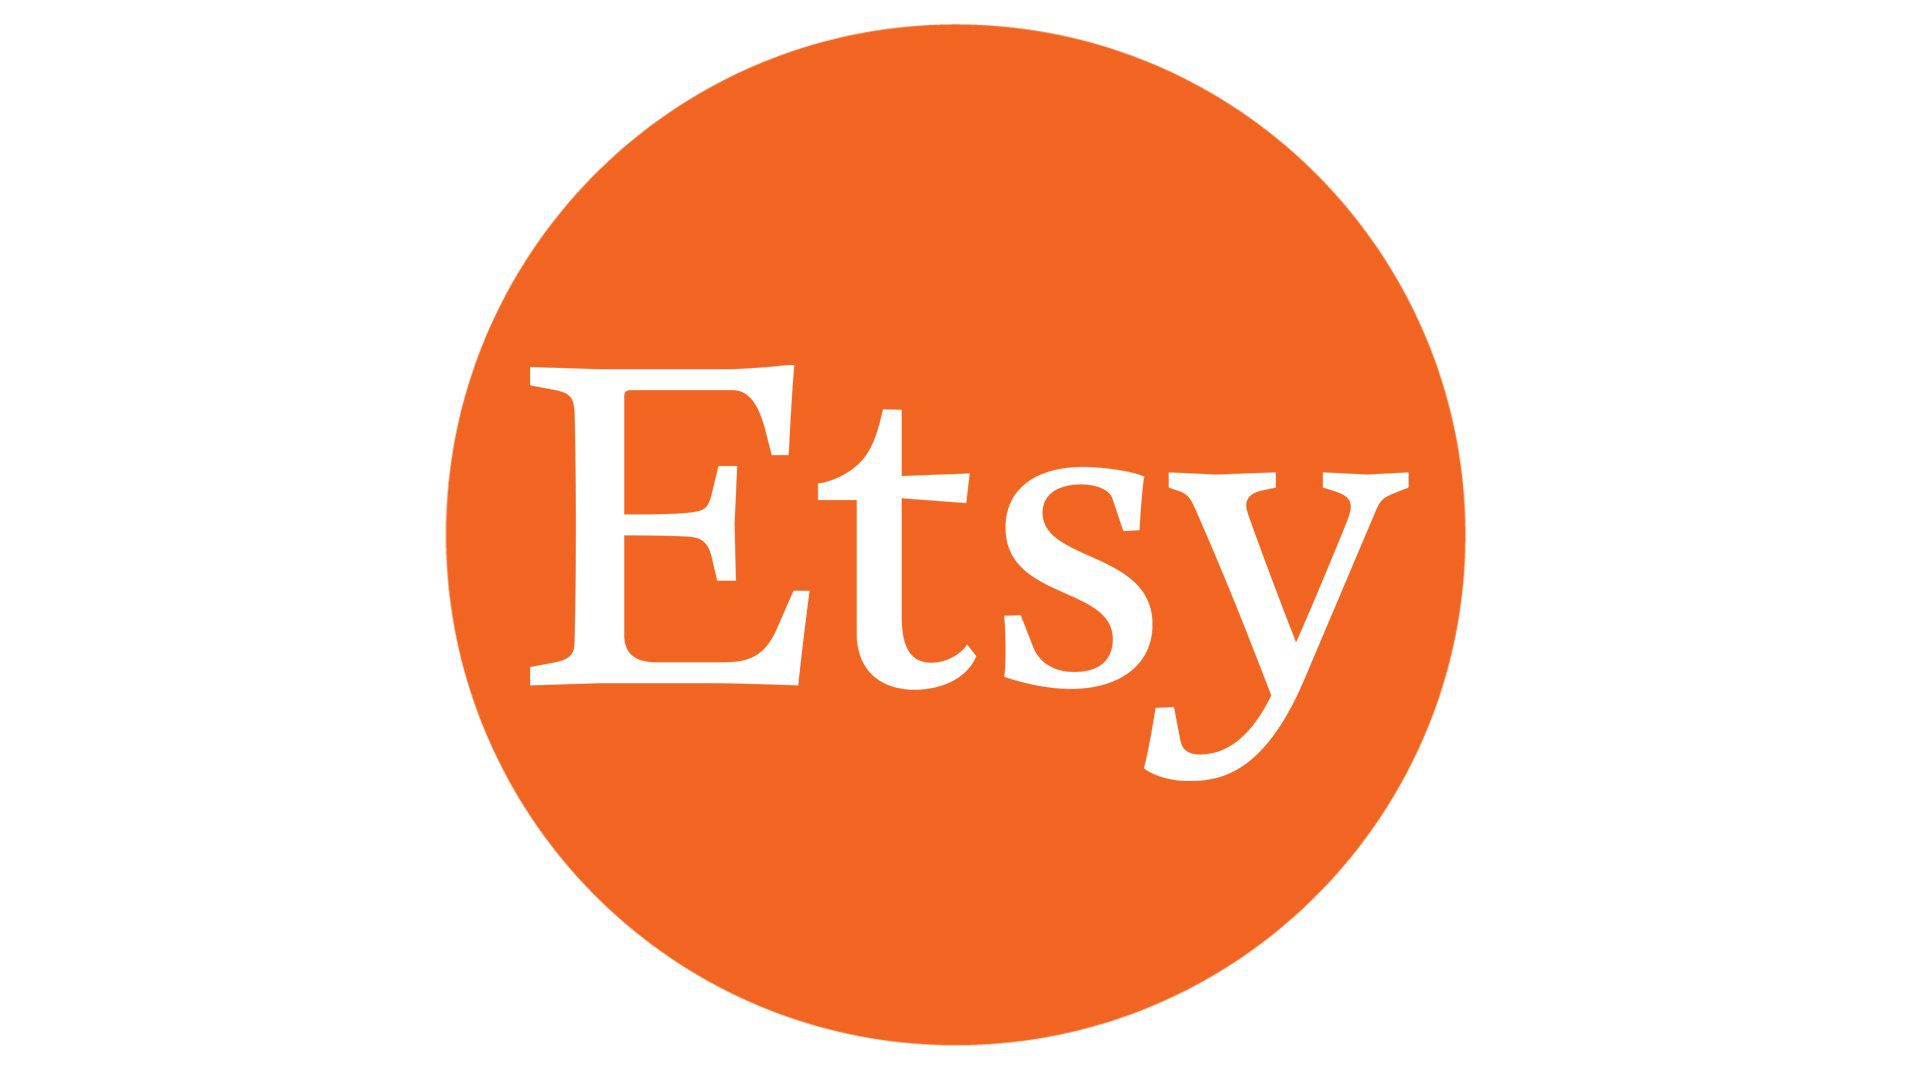 Selling Art: How to Get Sales on Etsy